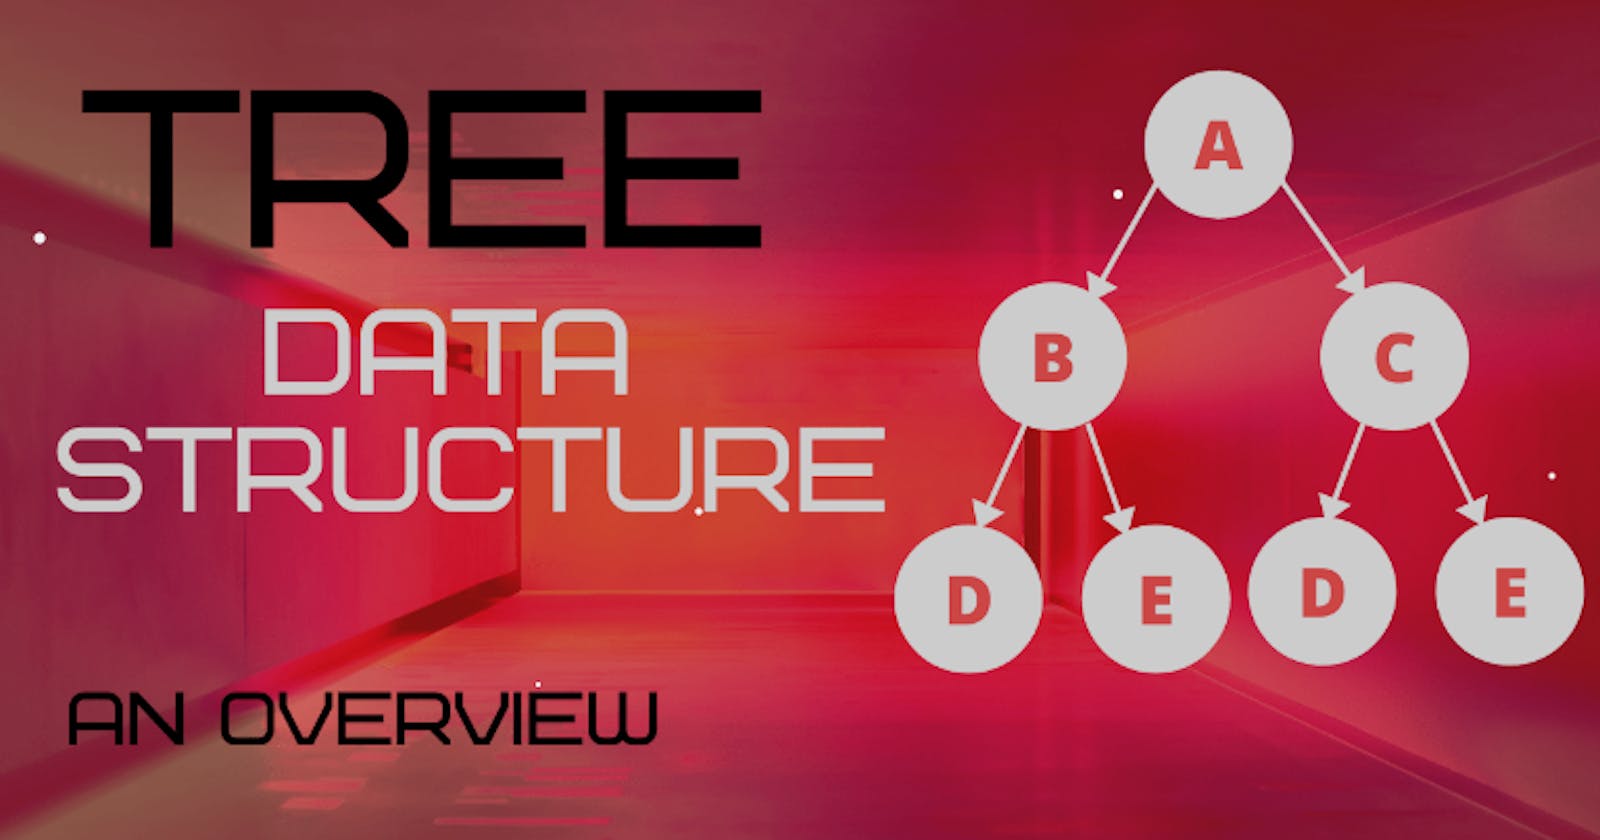 Tree Data Structure - Explanation And Implementation